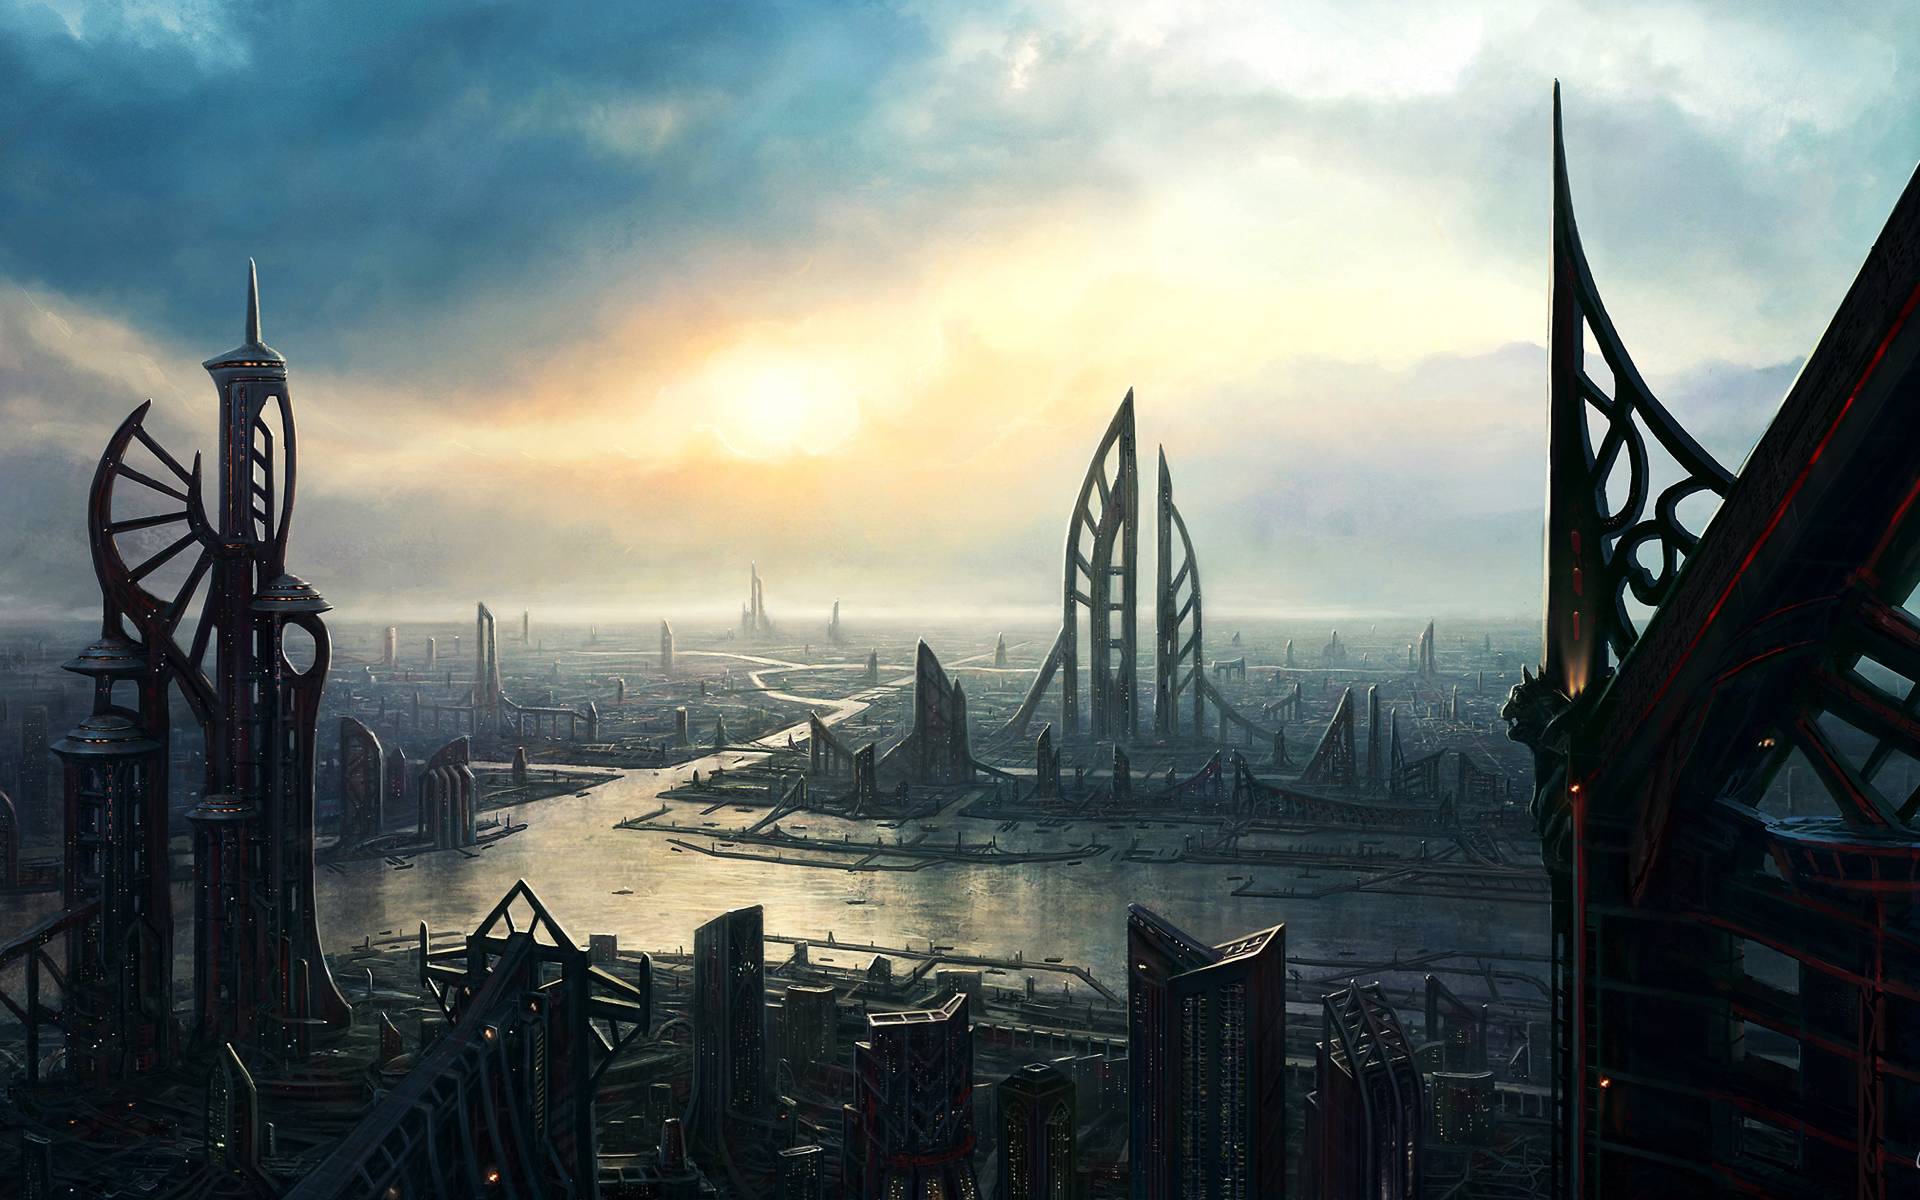 Download Sci Fi Background 17997 1920x1200 px High Resolution